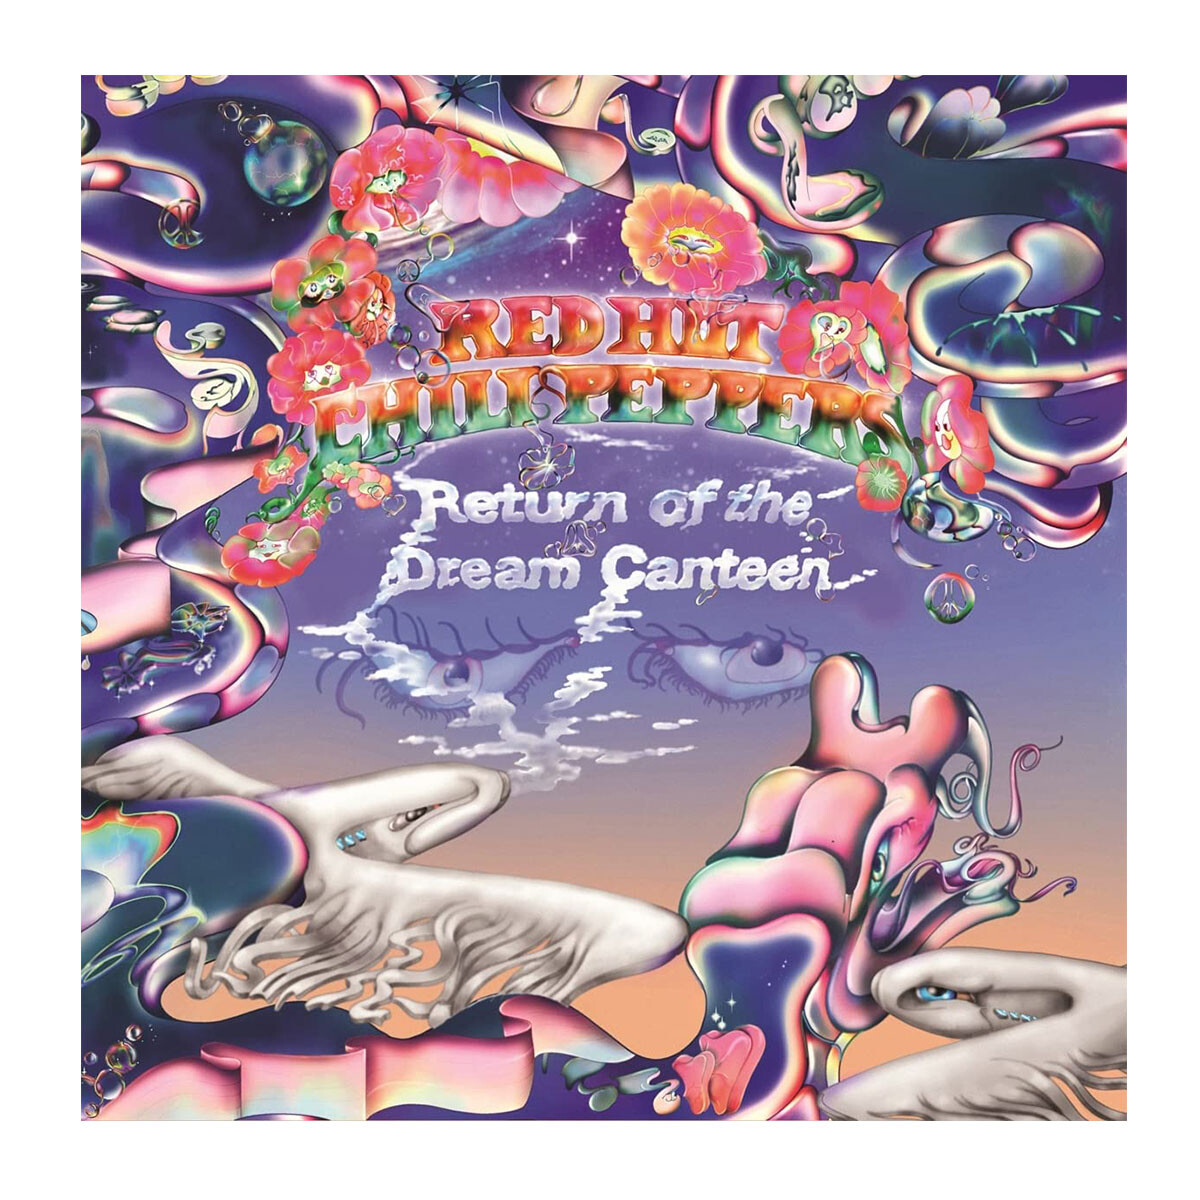 Red Hot Chili Peppers / Return Of The Dream Canteen 